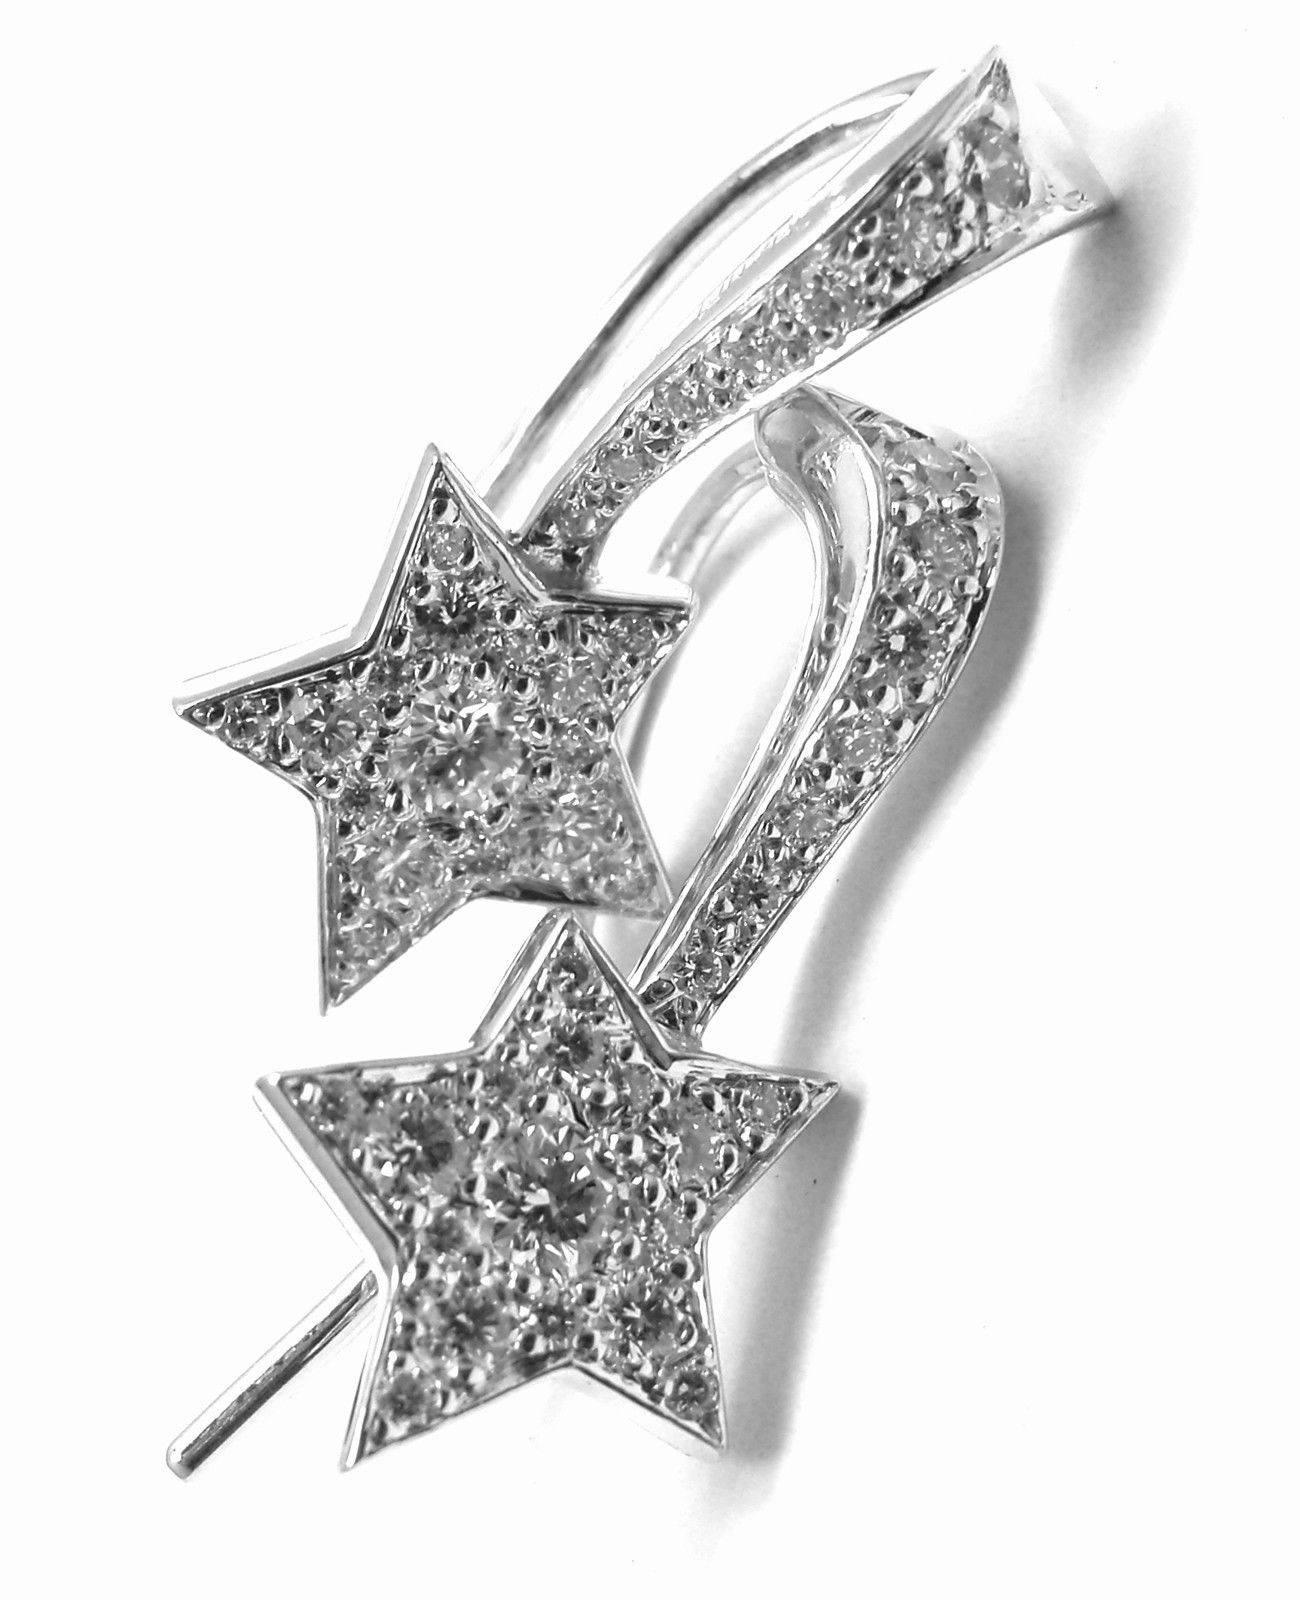 18k White Gold Diamond Star Comete Earrings by Chanel.
With 46 Round Brilliant Cut Diamonds, VVS1 Clarity, H Color. Total Diamond Weight: .60ct
These earrings are for pierced ears.
These earrings come with Chanel certificate and a